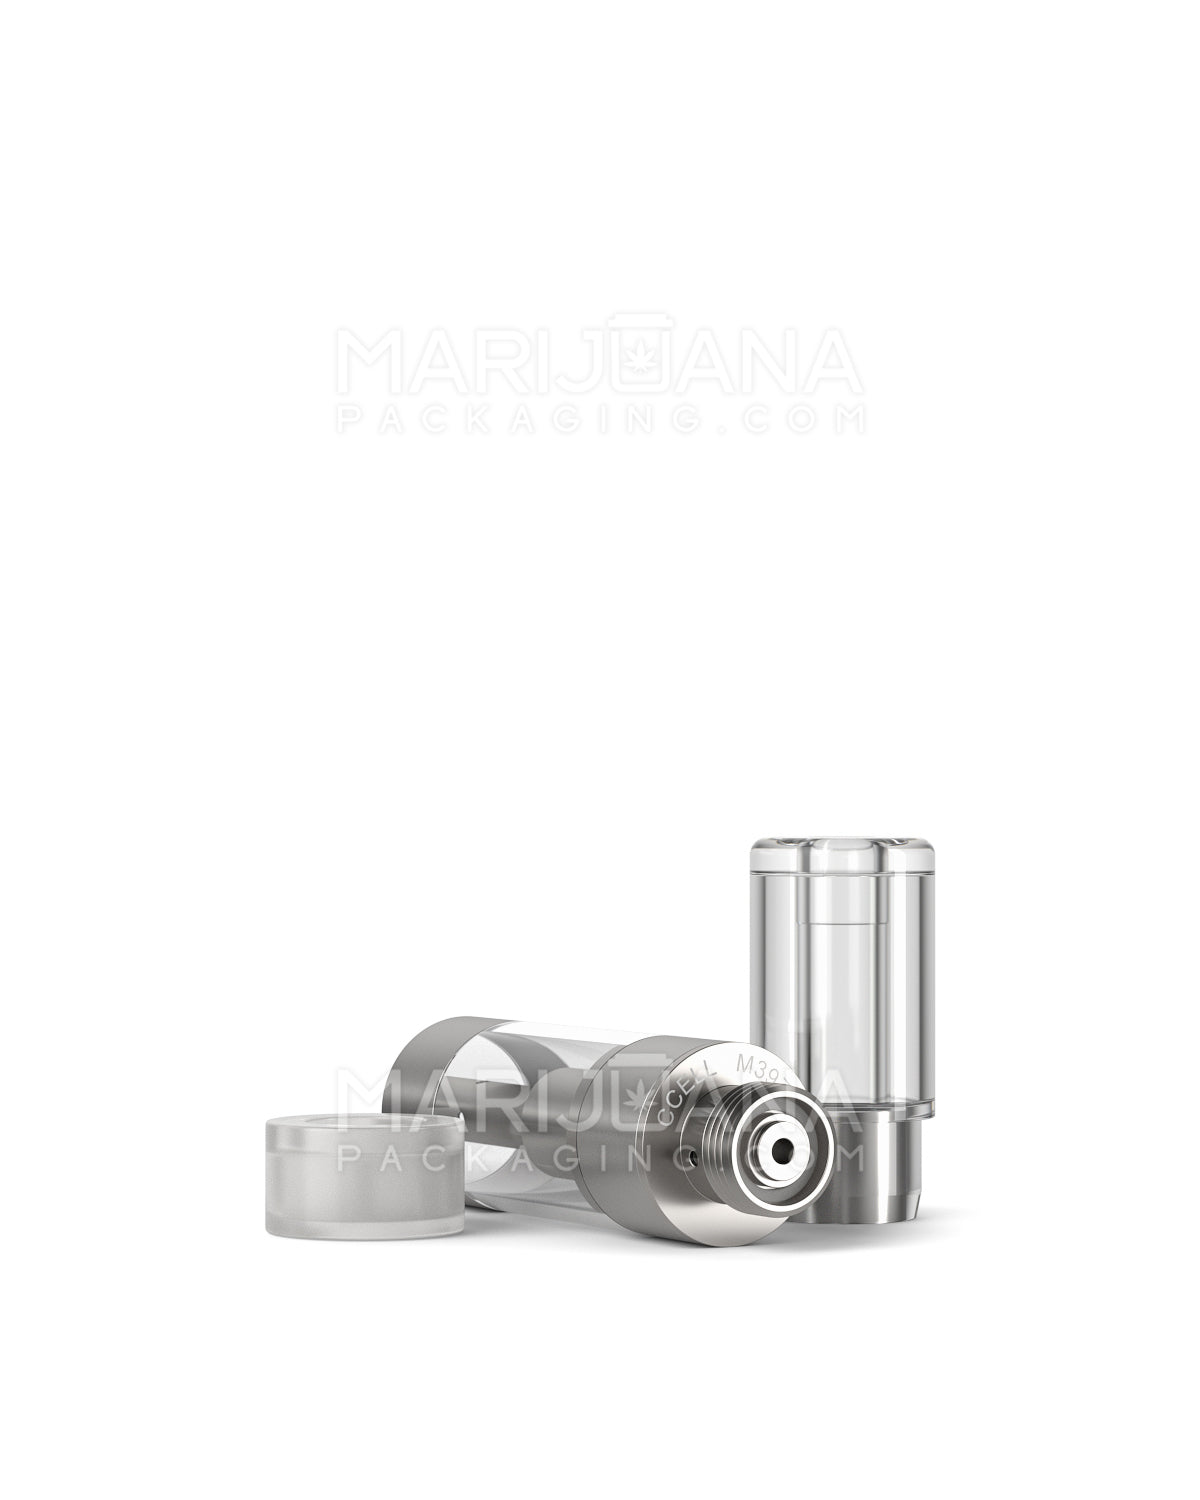 CCELL | Liquid6 Reactor Plastic Vape Cartridge with Barrel Clear Plastic Mouthpiece | 0.5mL - Press On - 100 Count - 8